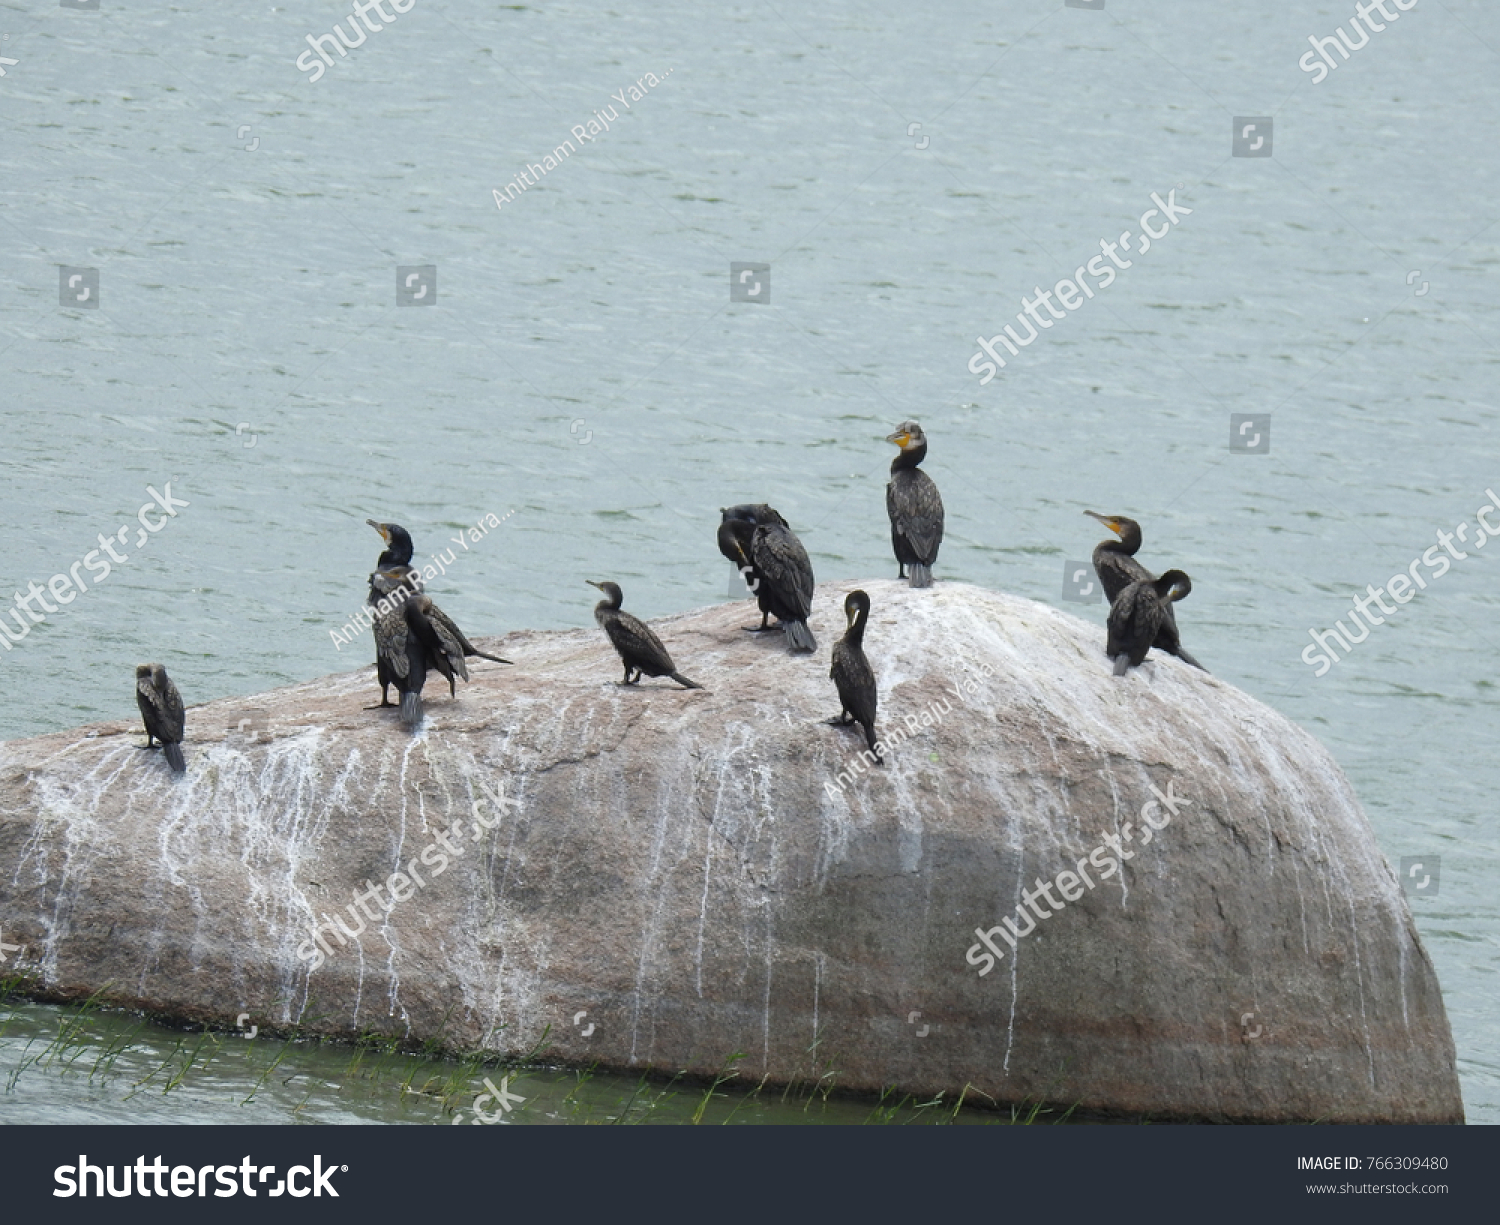 Group of Cormorant (Shags) Birds on a big Rock surrounded by water in a sunny afternoon. Beautiful Avians at the lake #766309480